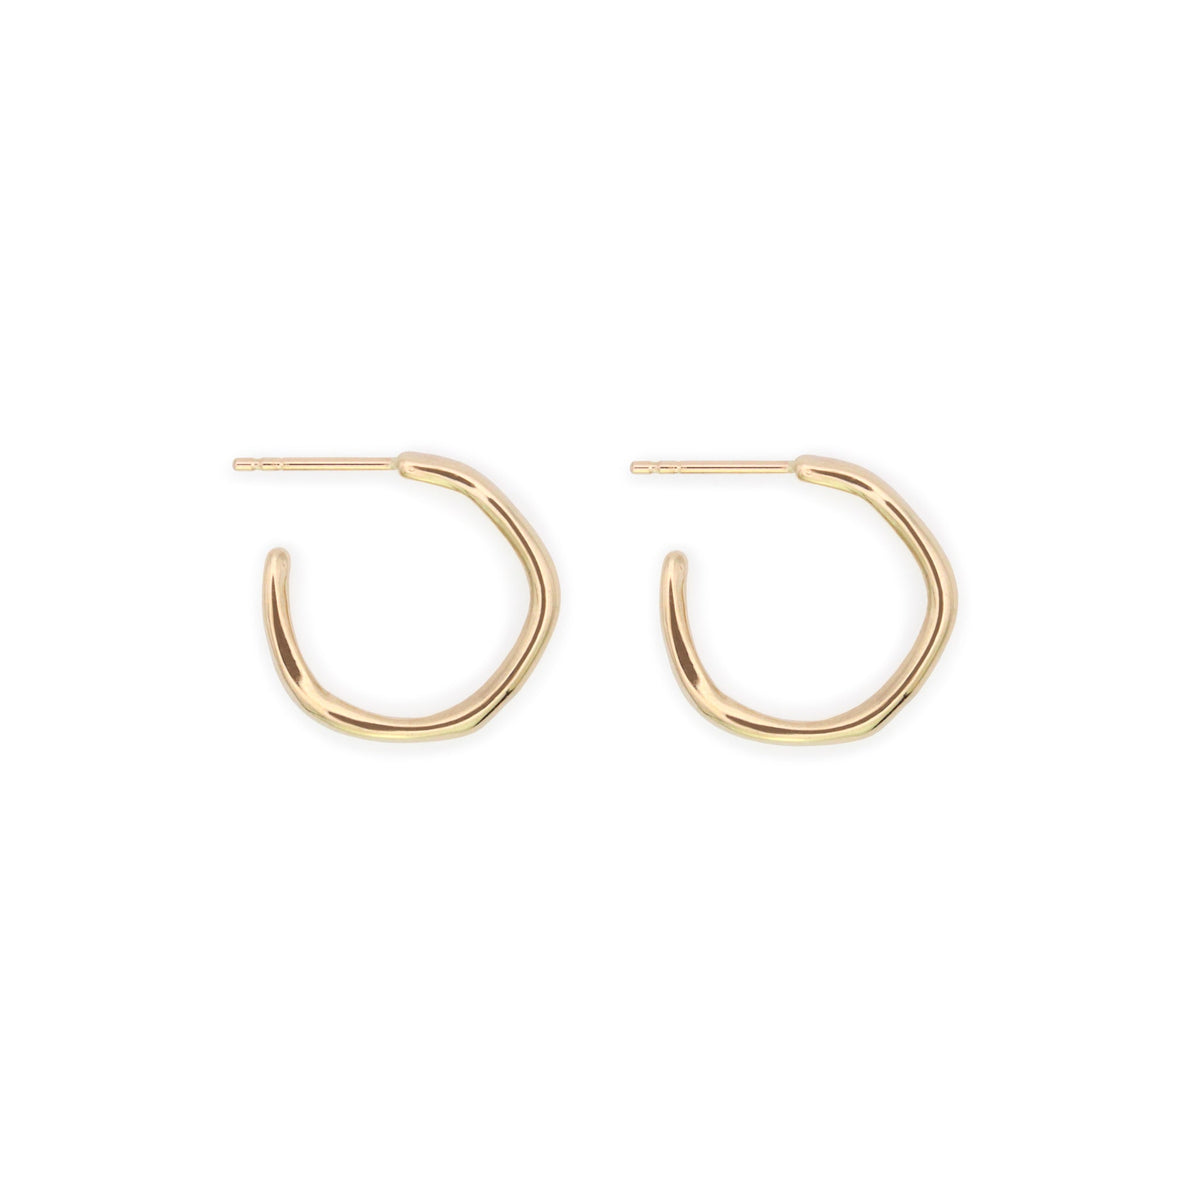 Lola Hoop Earrings - Ethically Made by Catori Life | Catori Life